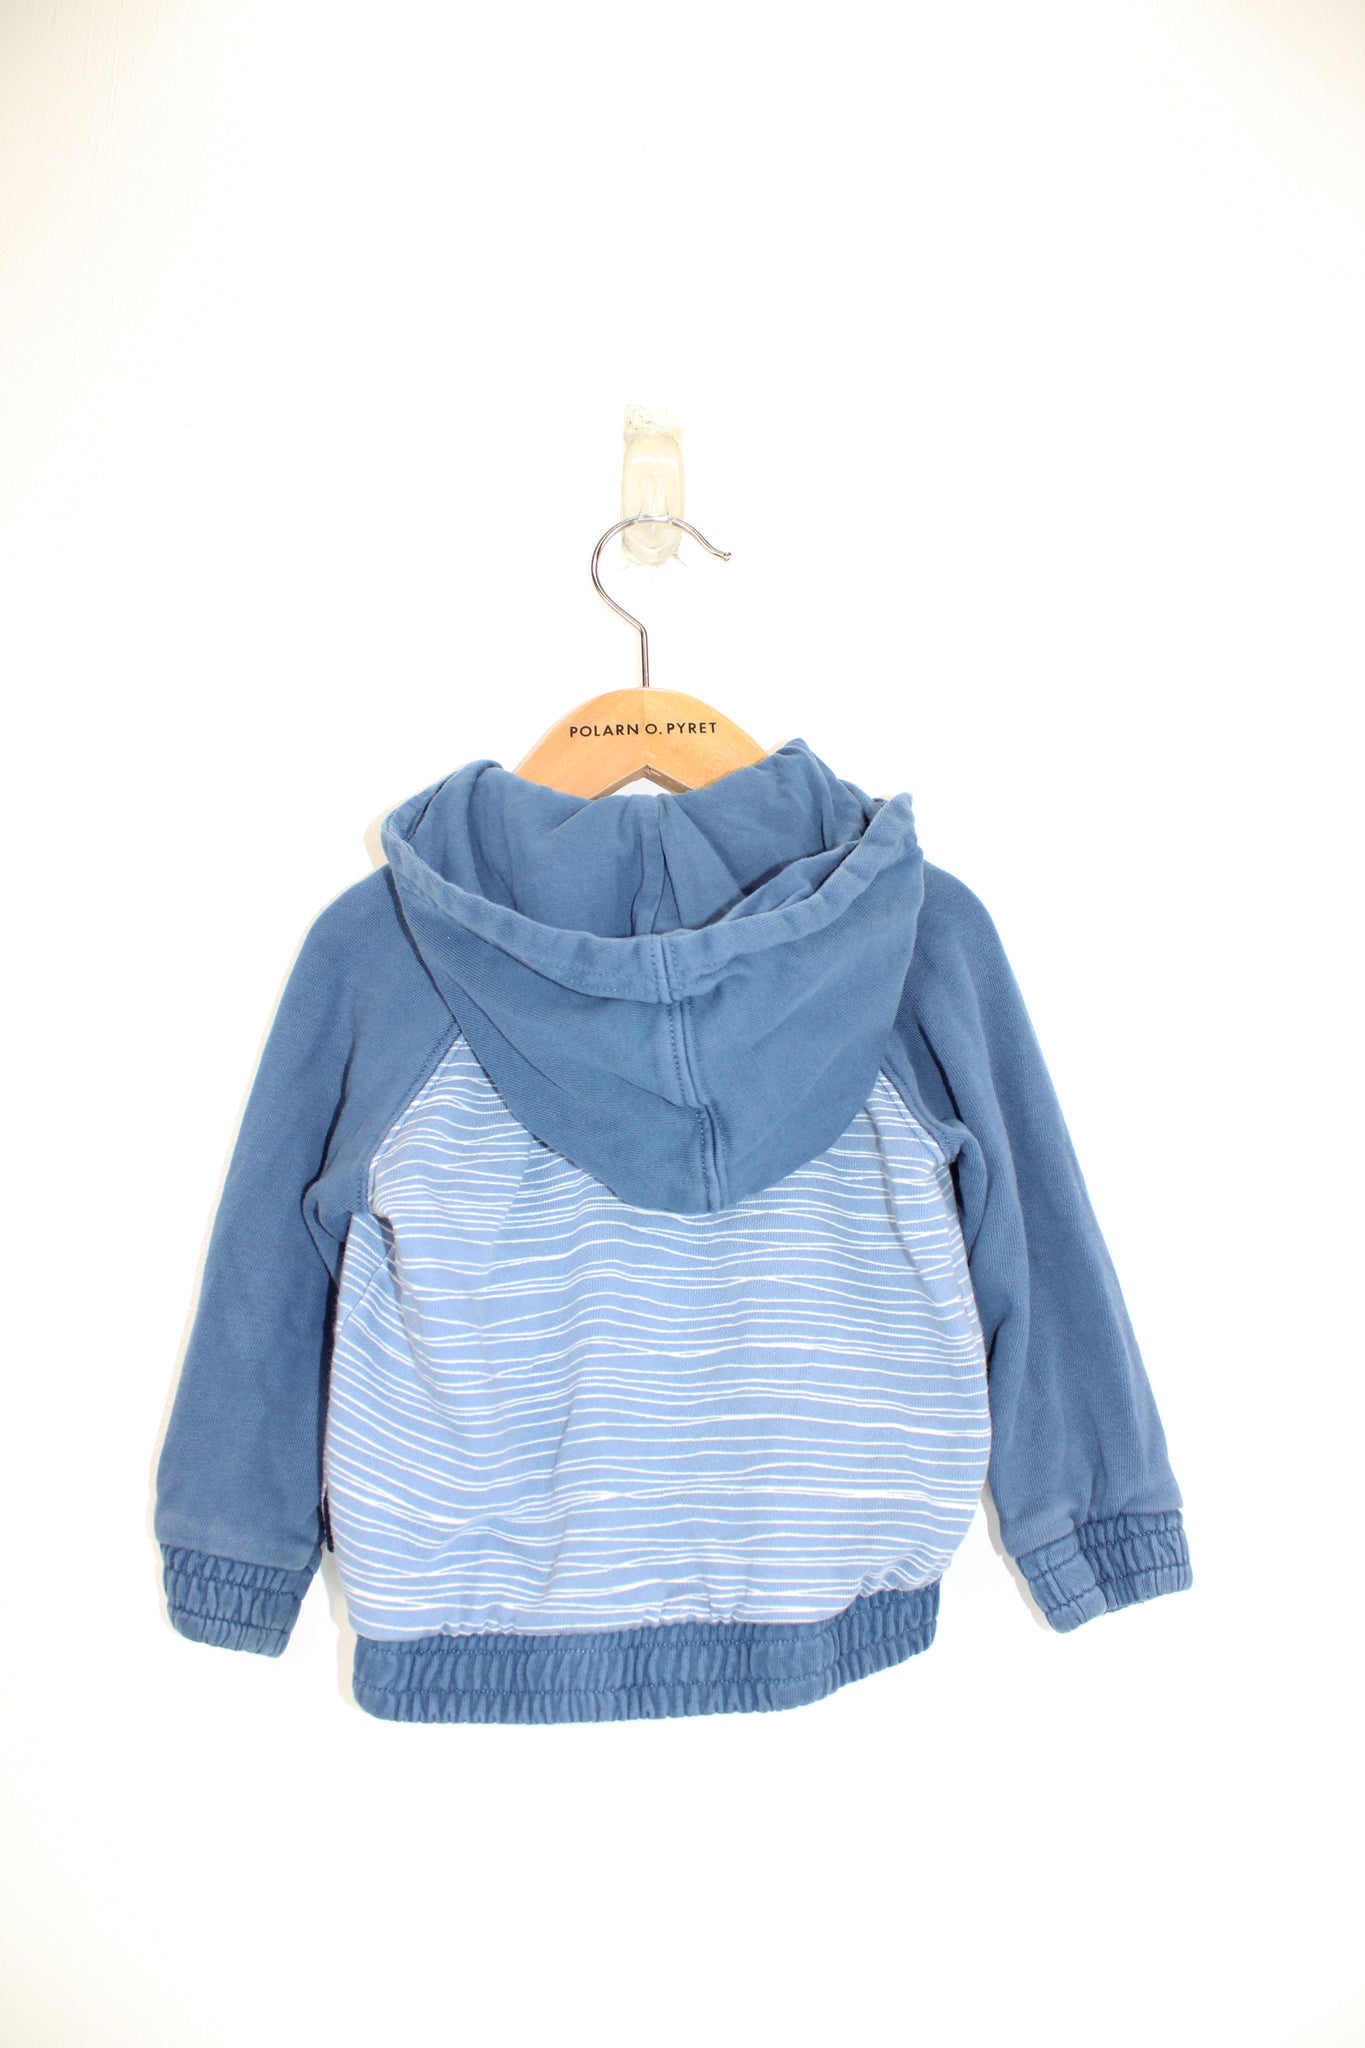 Baby Hooded Jacket 6-12m / 80